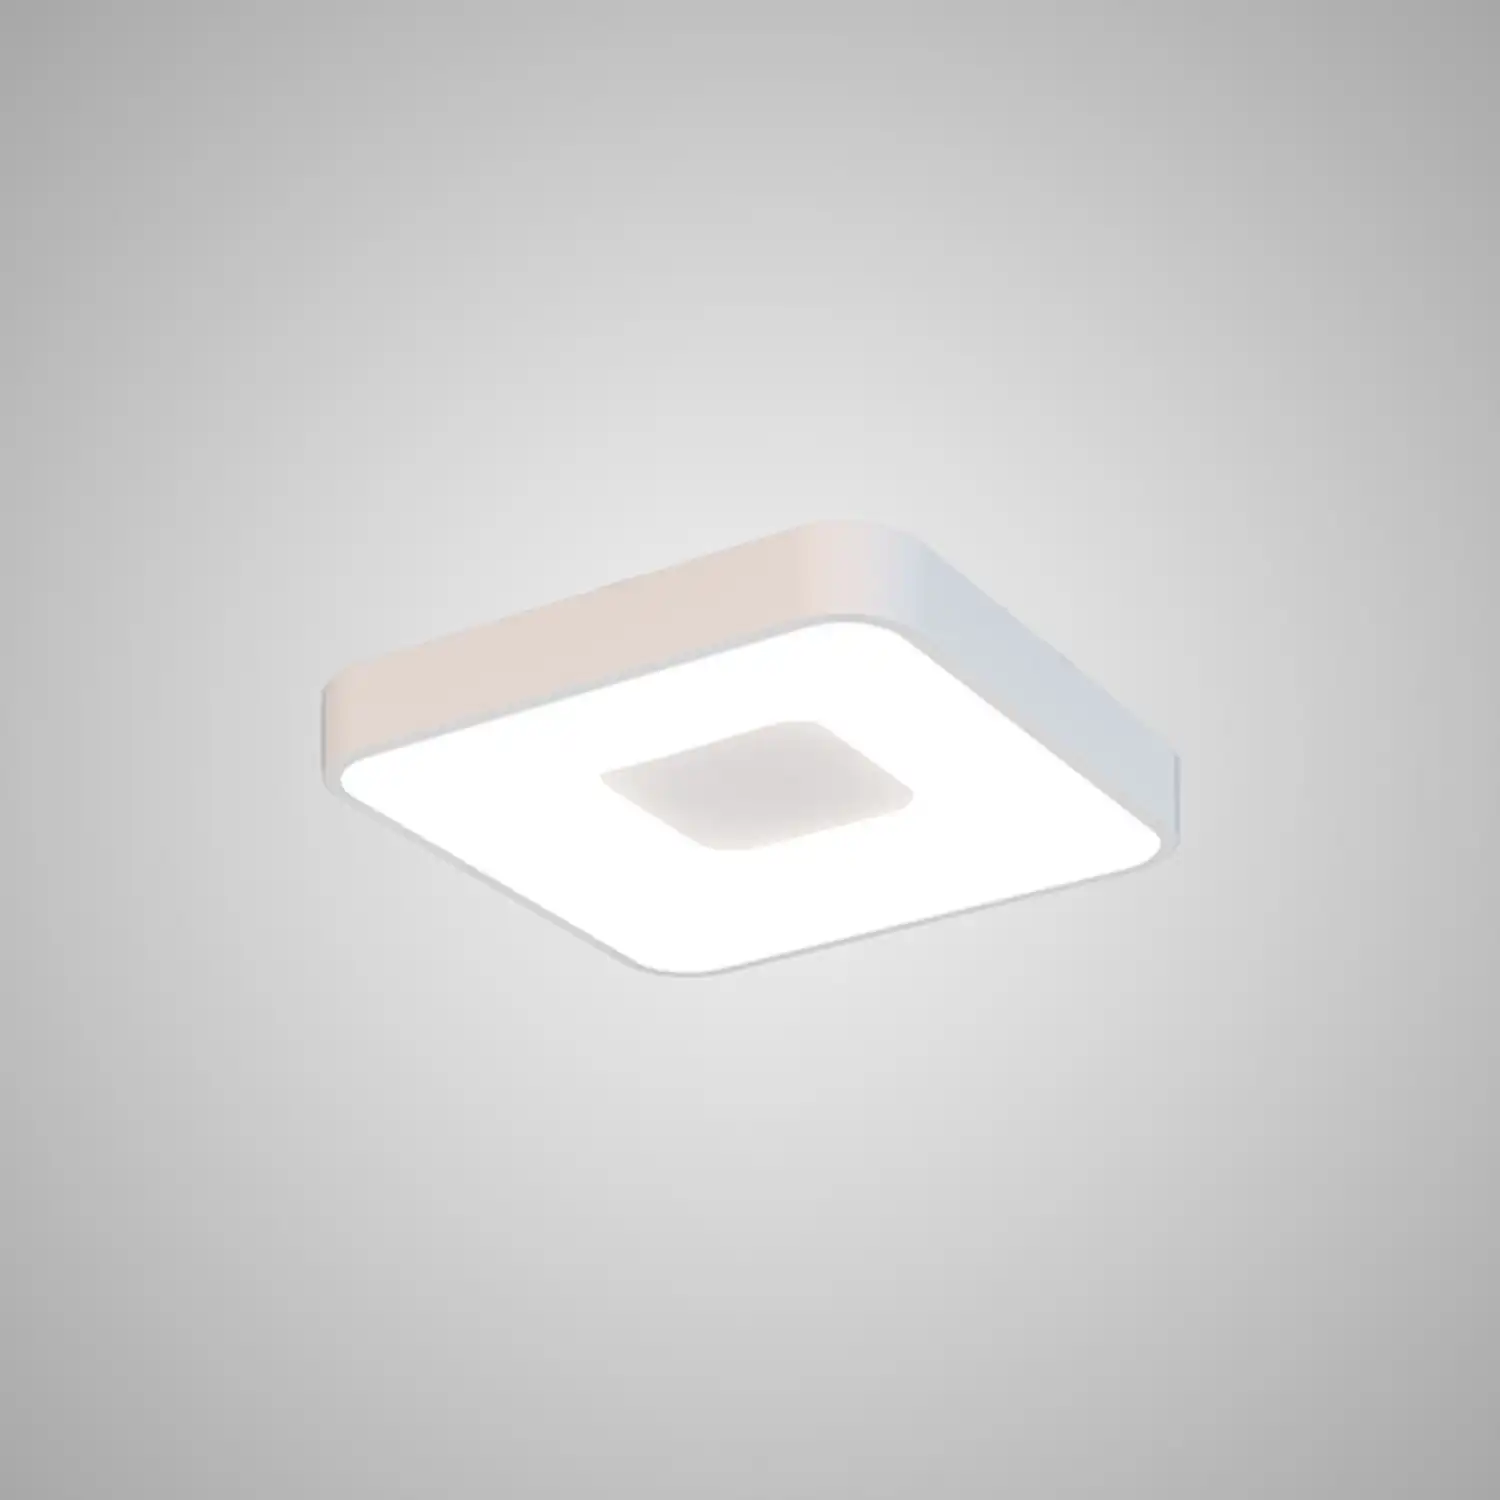 Coin Square Ceiling 56W LED With Remote Control 2700K 5000K, 2500lm, White, 3yrs Warranty